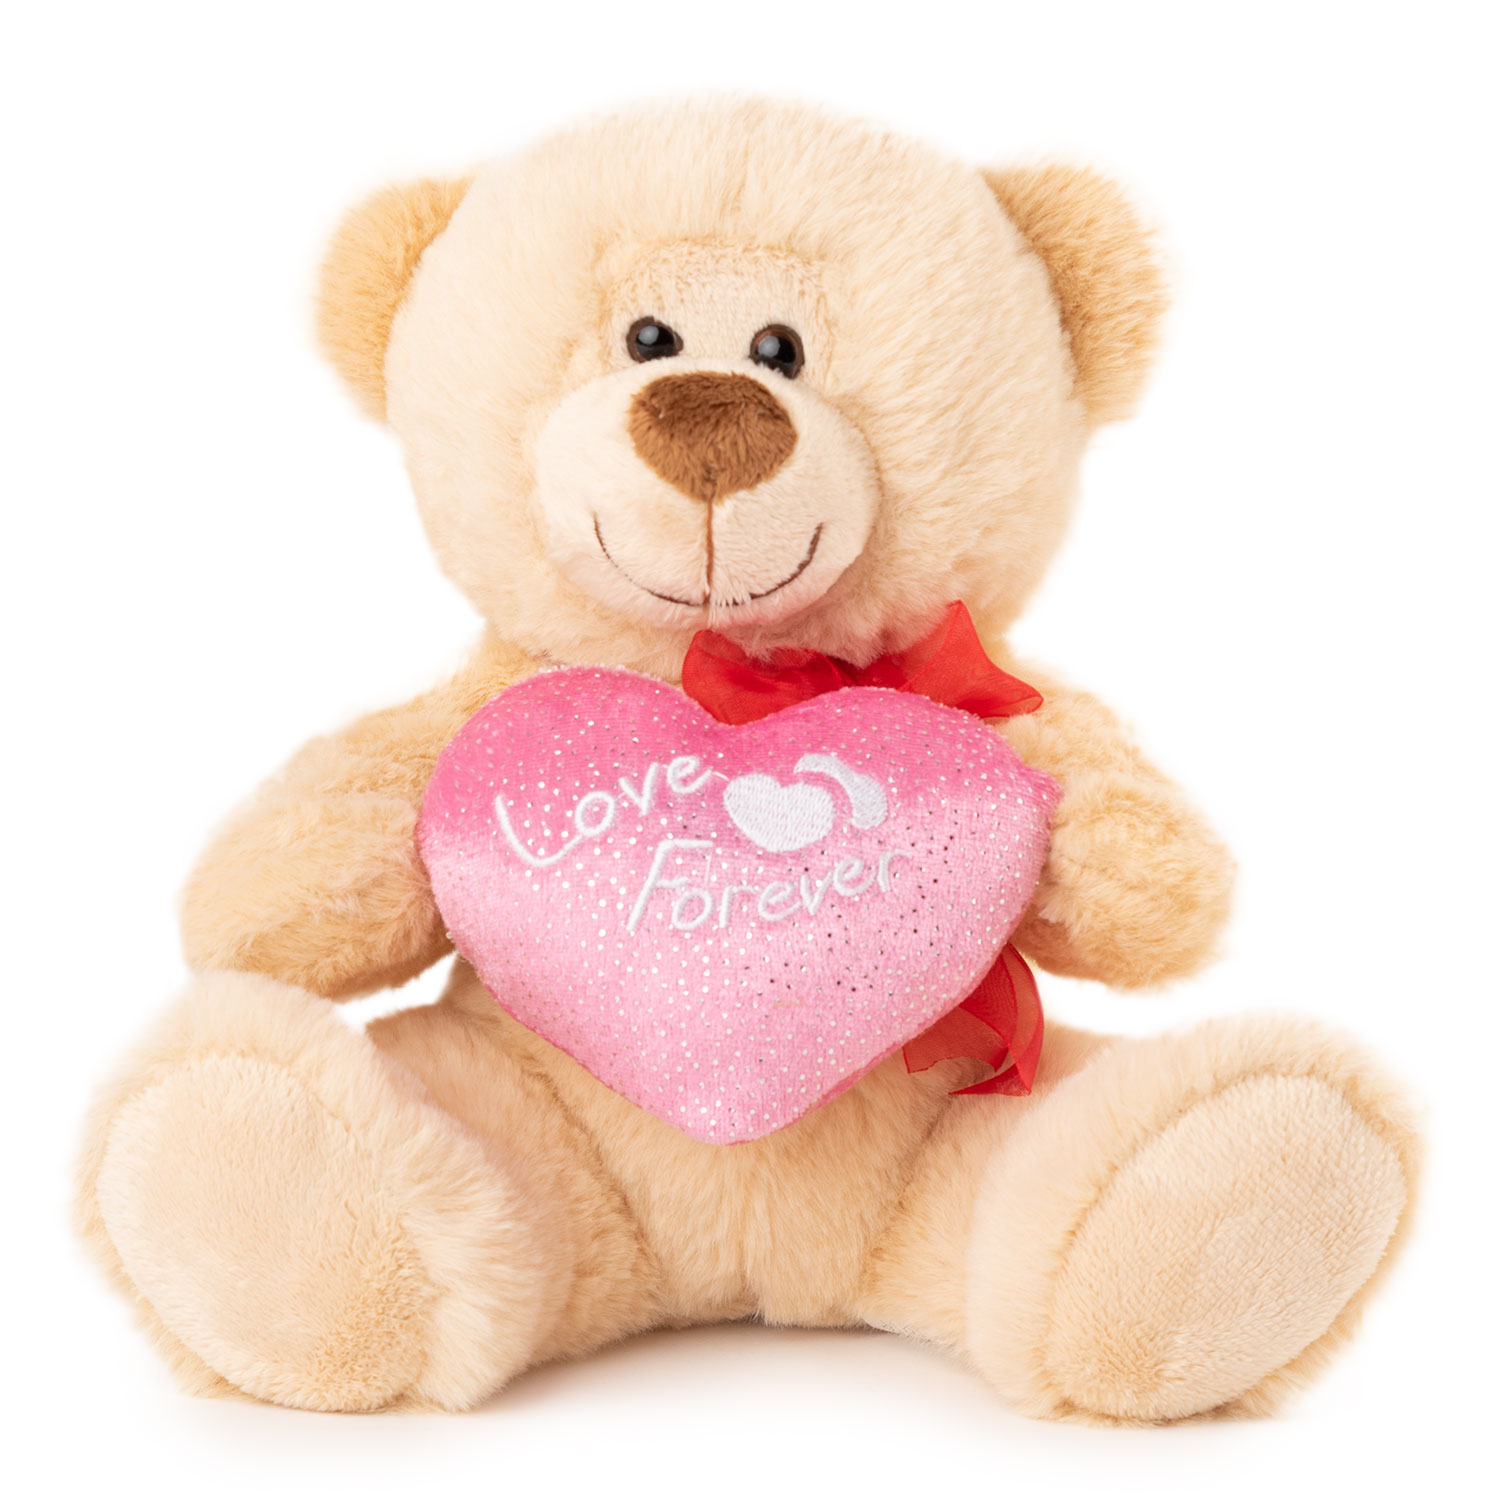 Bear with a heart "Love Forever" - Beige